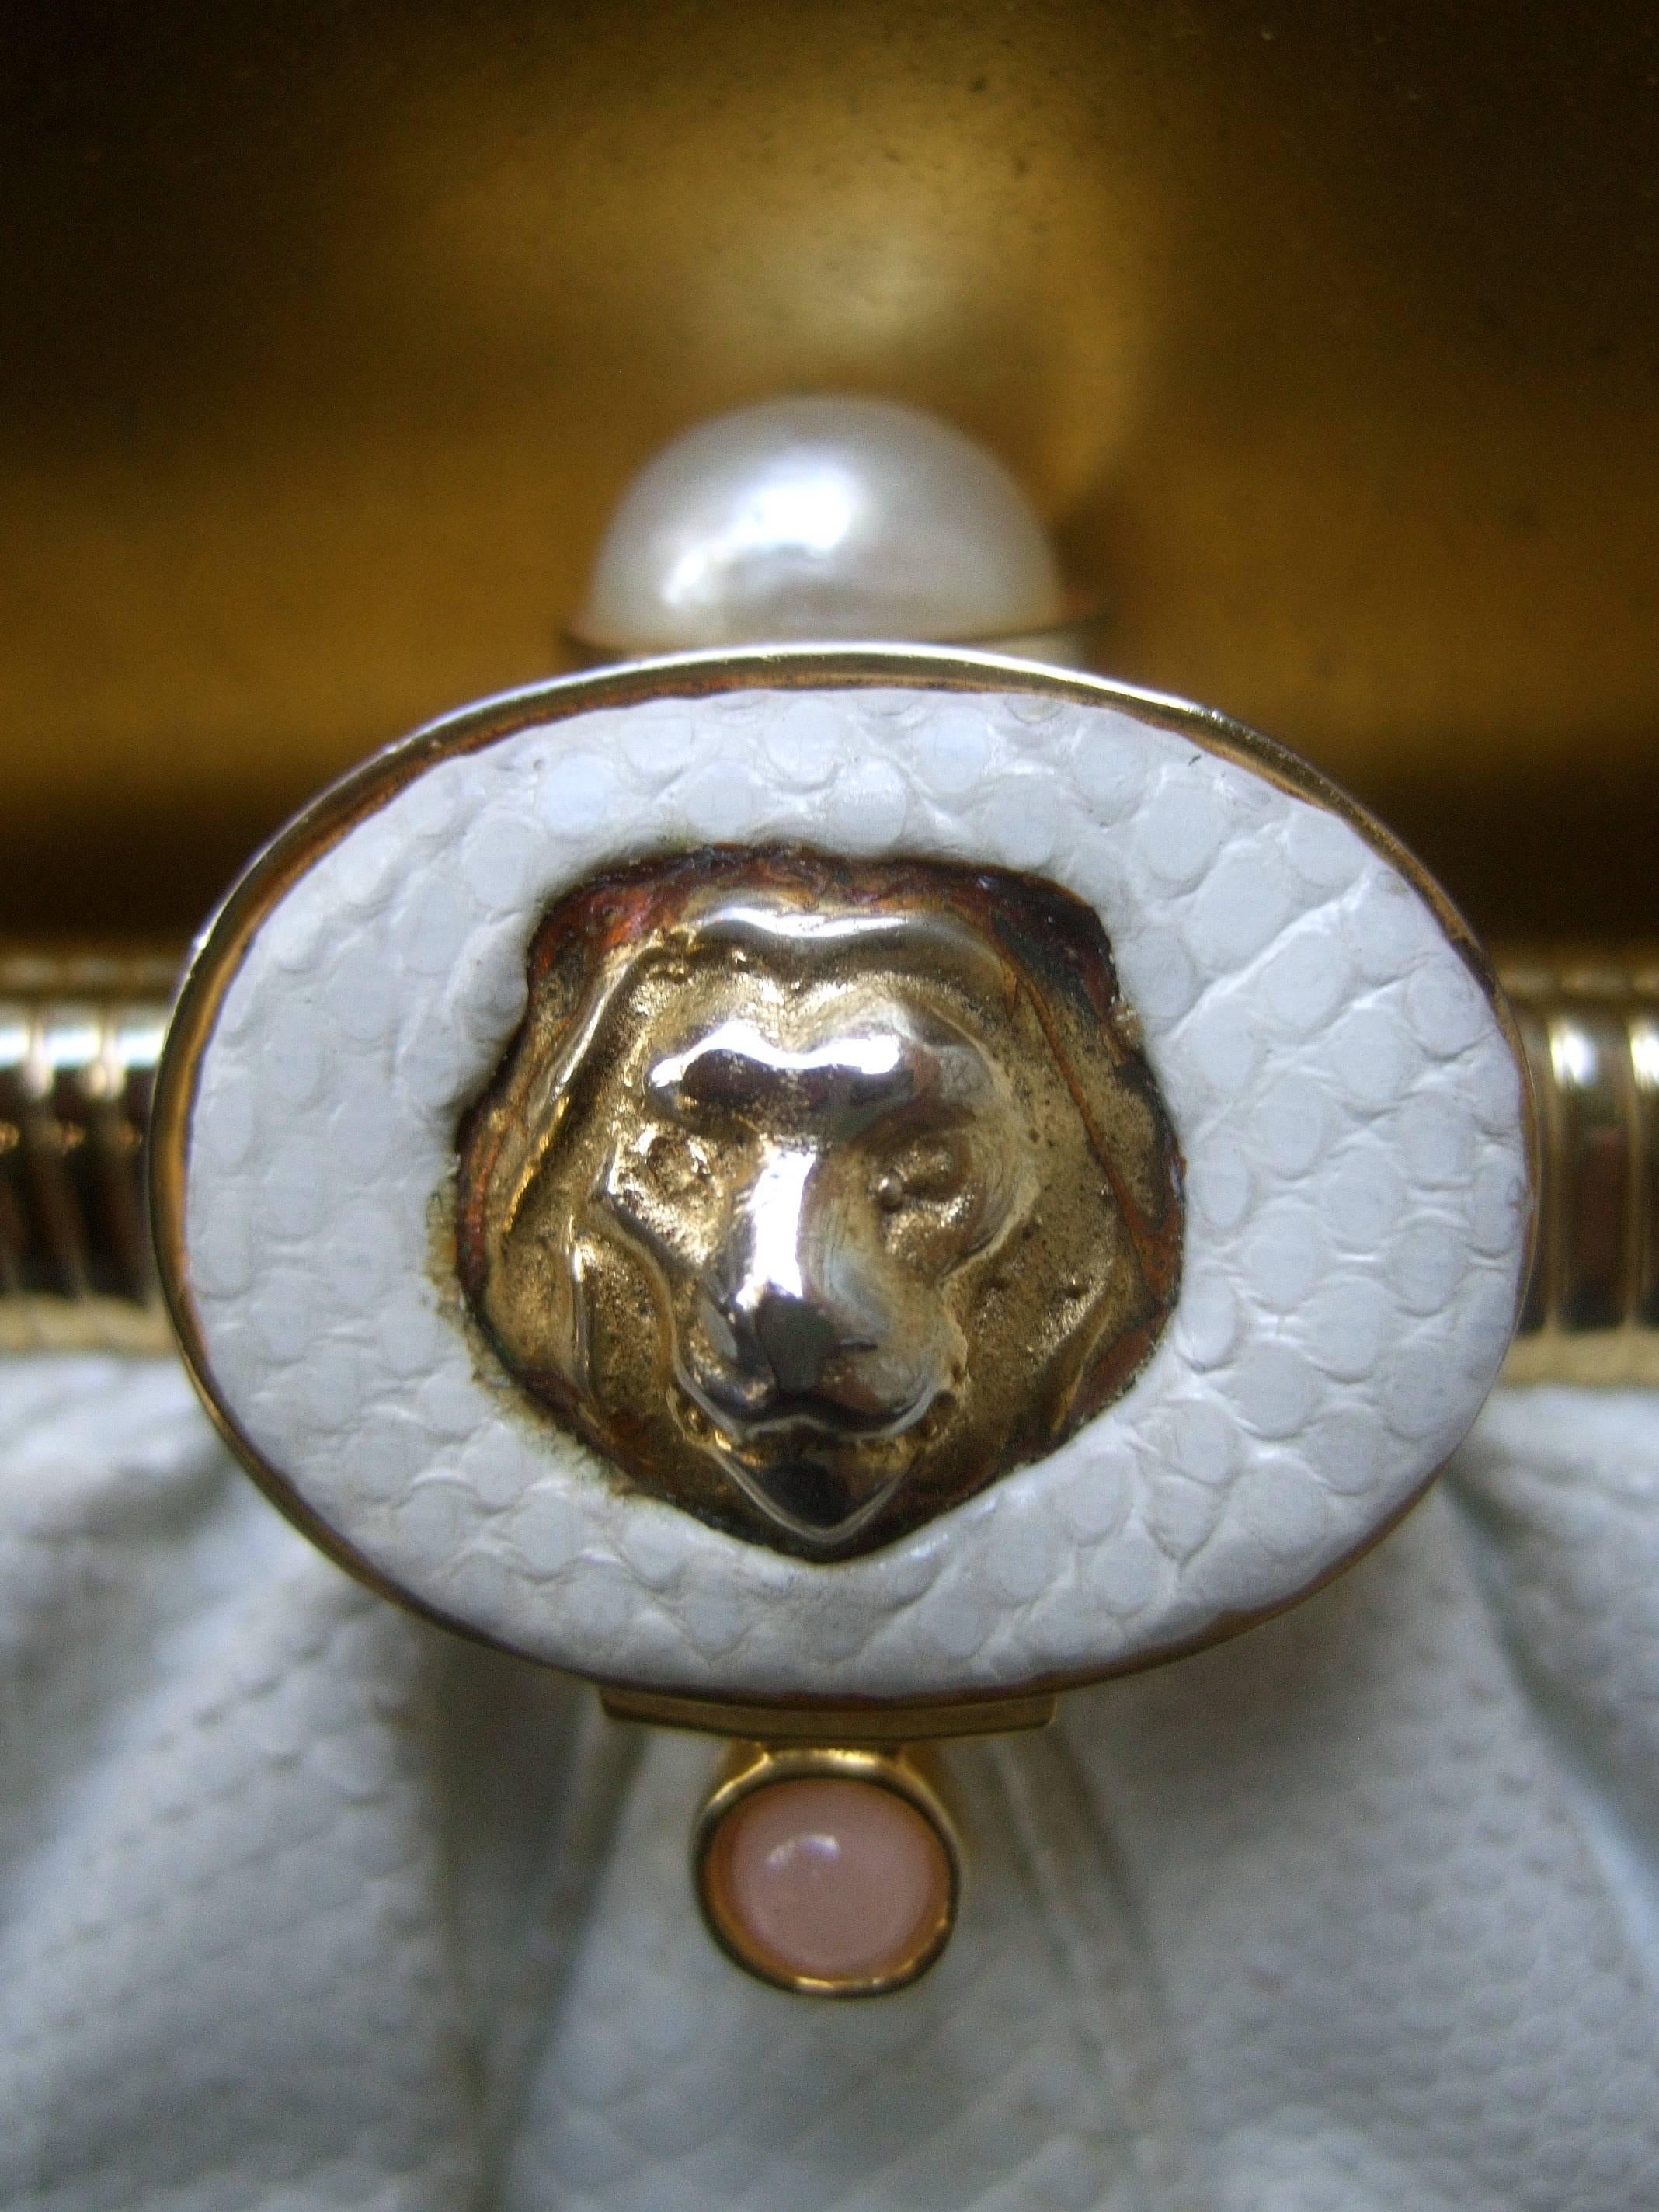 Judith Leiber Lion clasp embossed white leather handbag c 1980s
The elegant handbag is adorned with a gilt metal lion's head
emblem that serves as the clasp emblem. Accented with a glass
enamel pearl and tiny pink glass cabochon 

The versatile